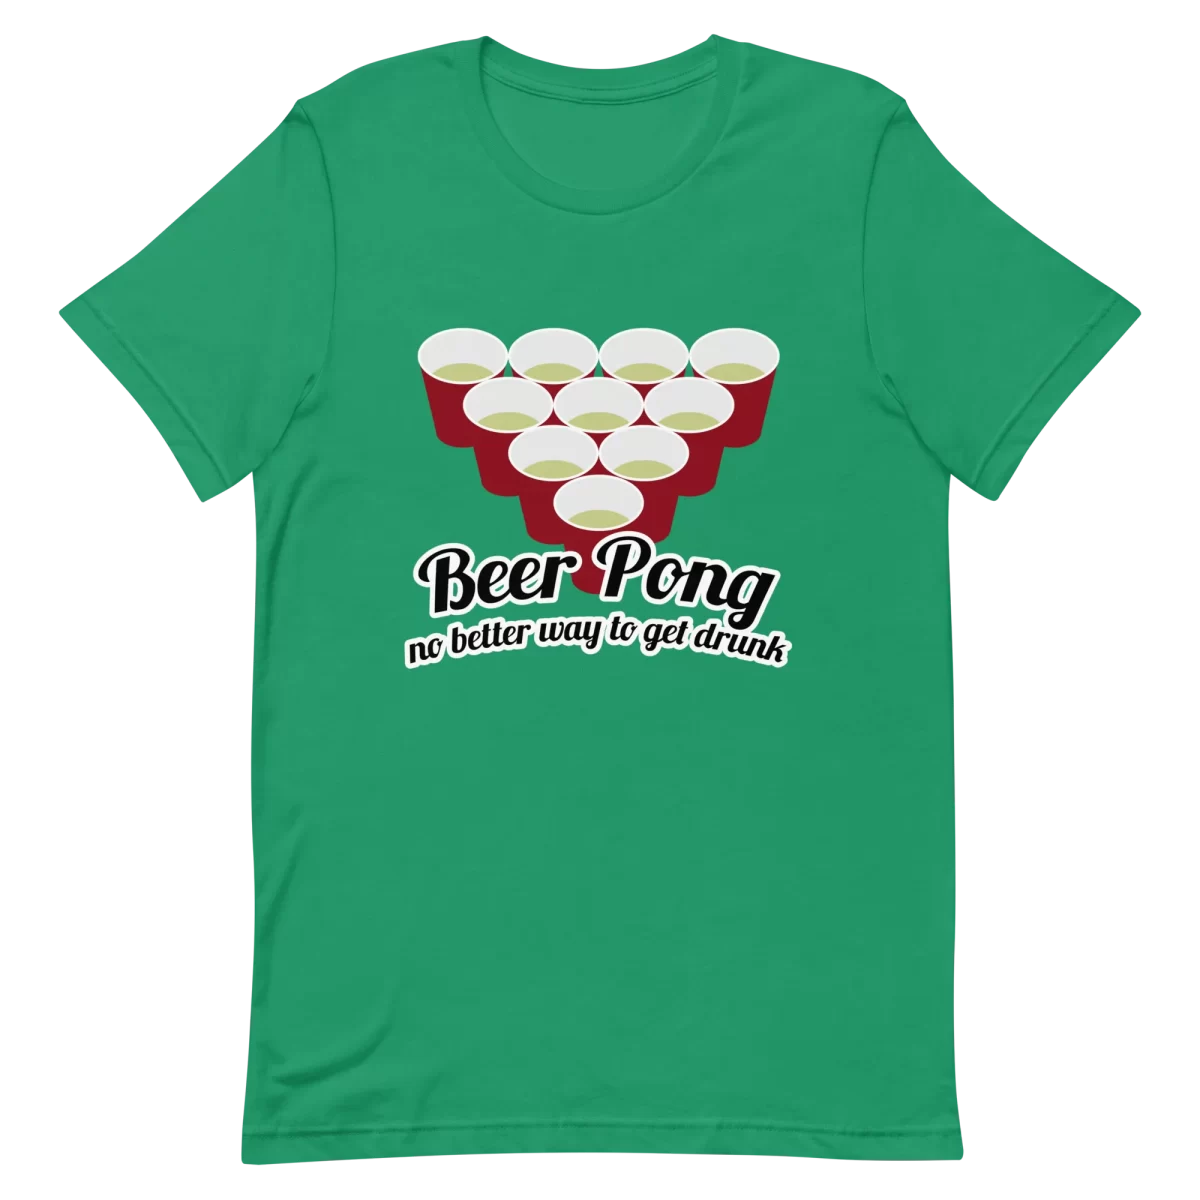 Unisex T-Shirt - Beer Pong No Better Way To Get Drunk - Kelly